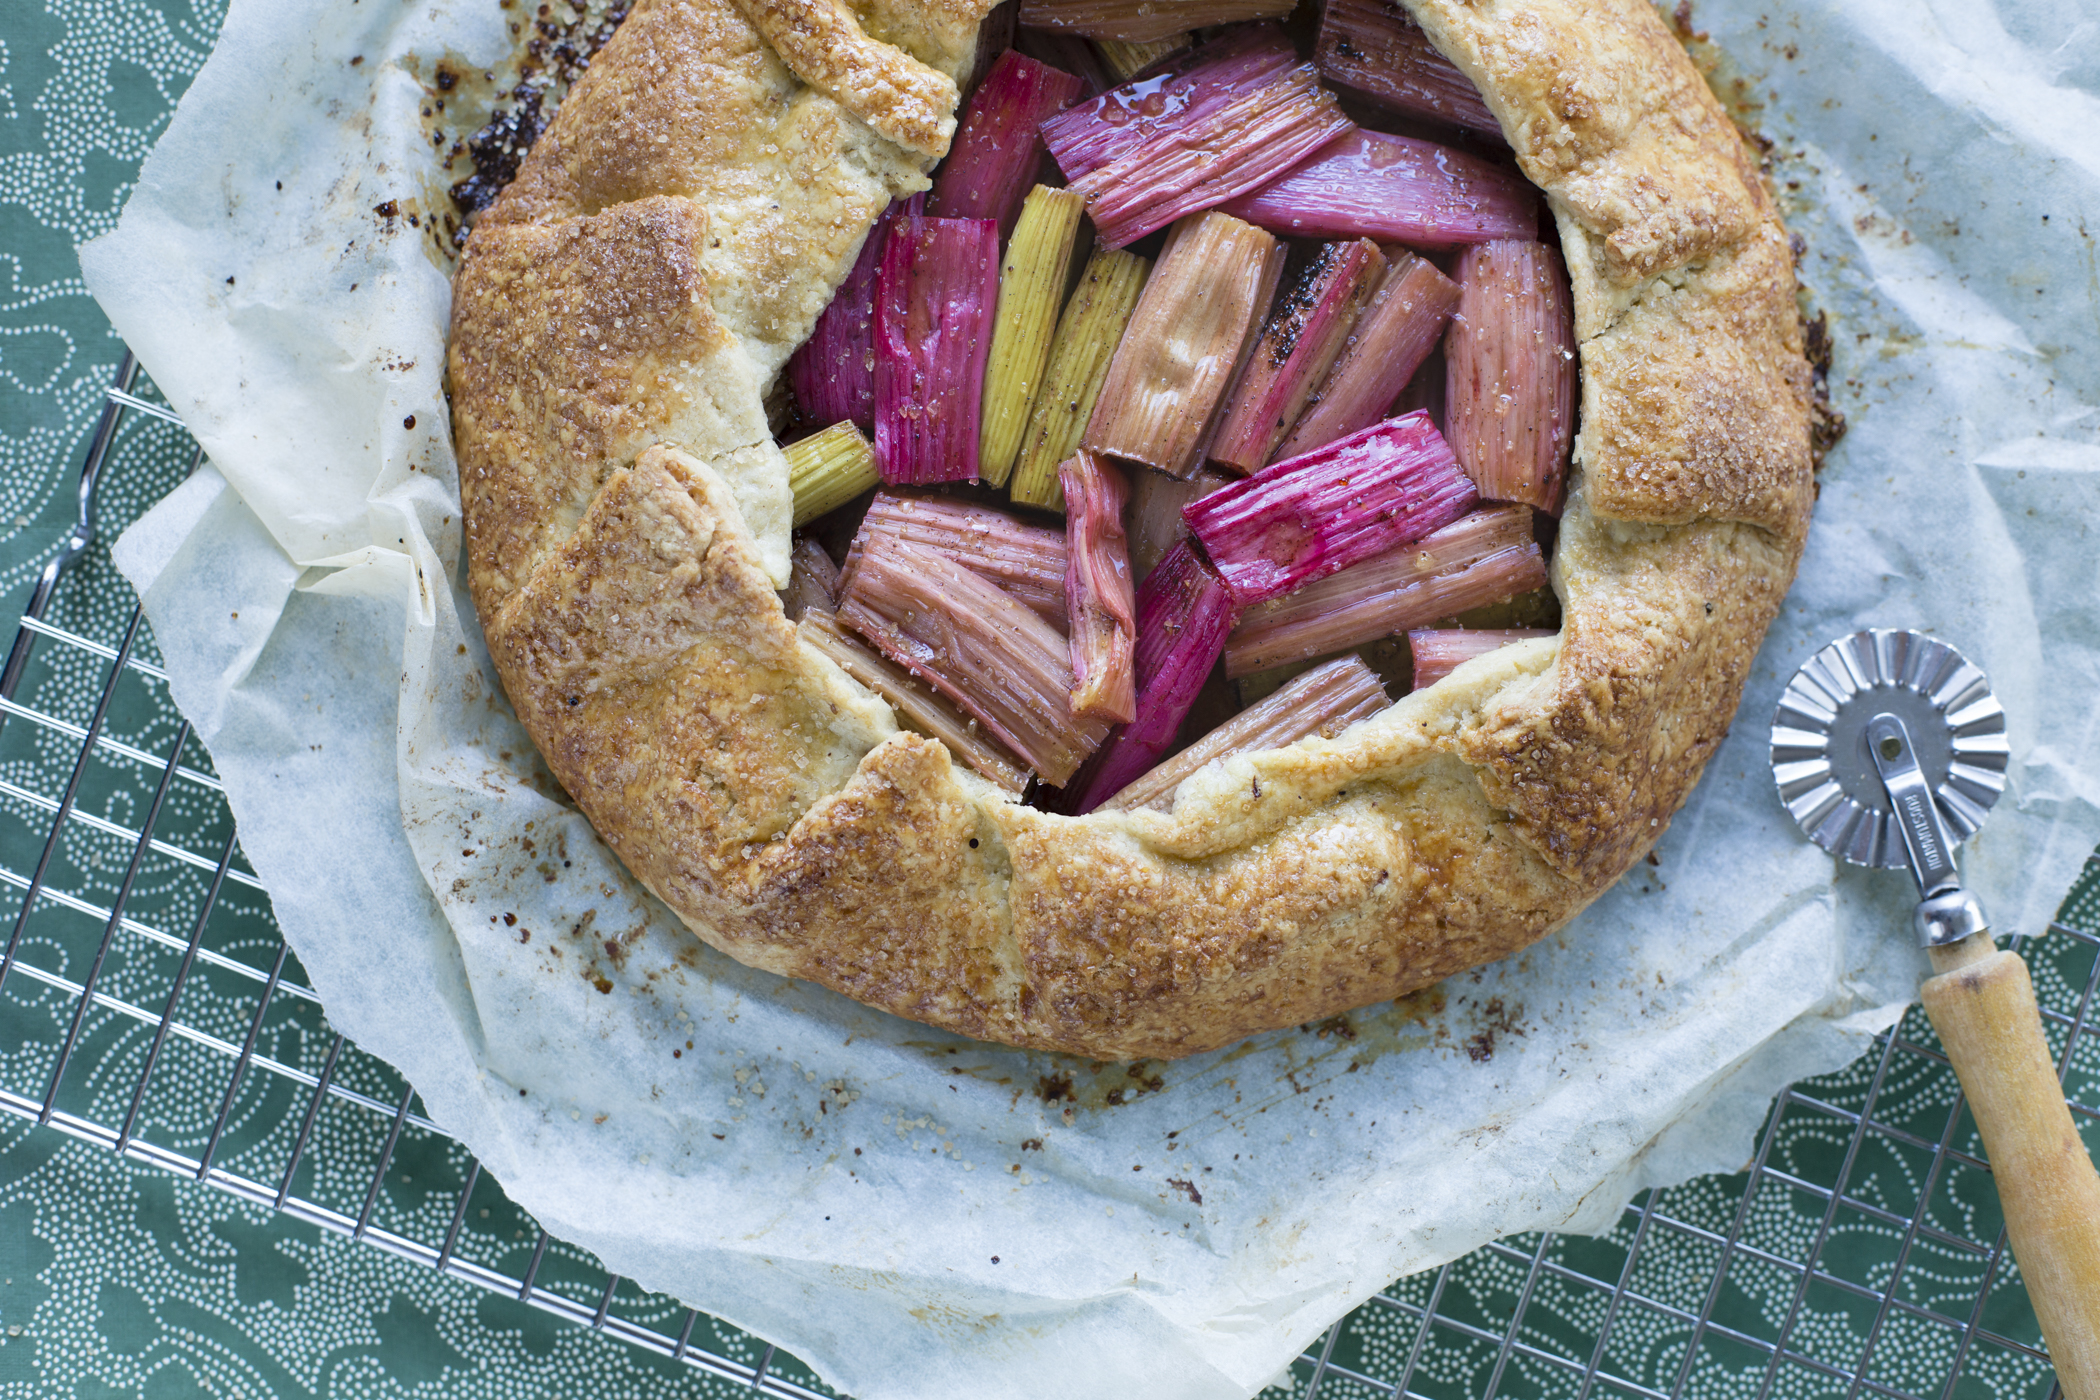 French classic galette filled w/ rhubarb